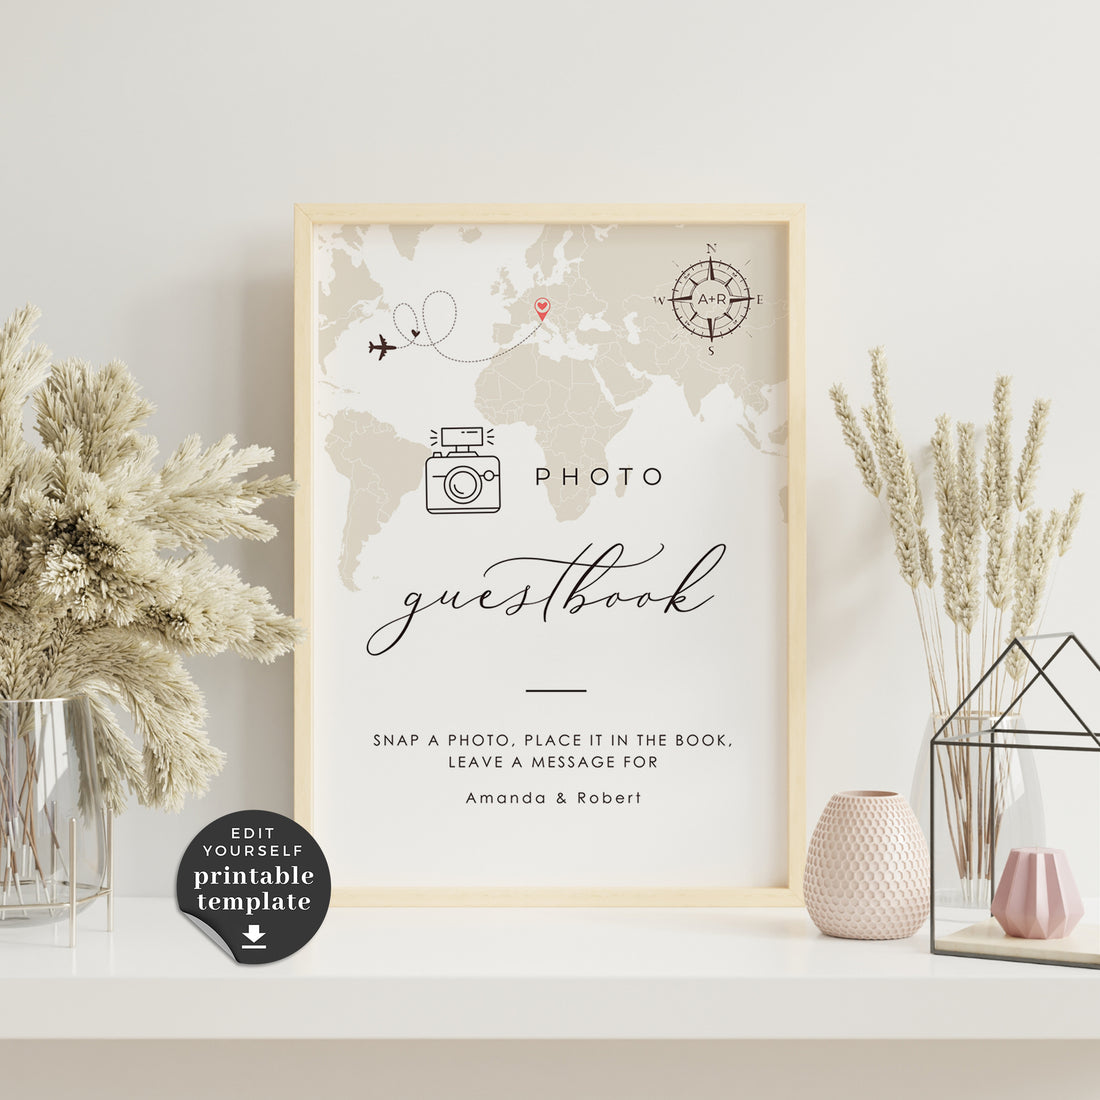 Sofia | Photo Guest Book Sign Printable